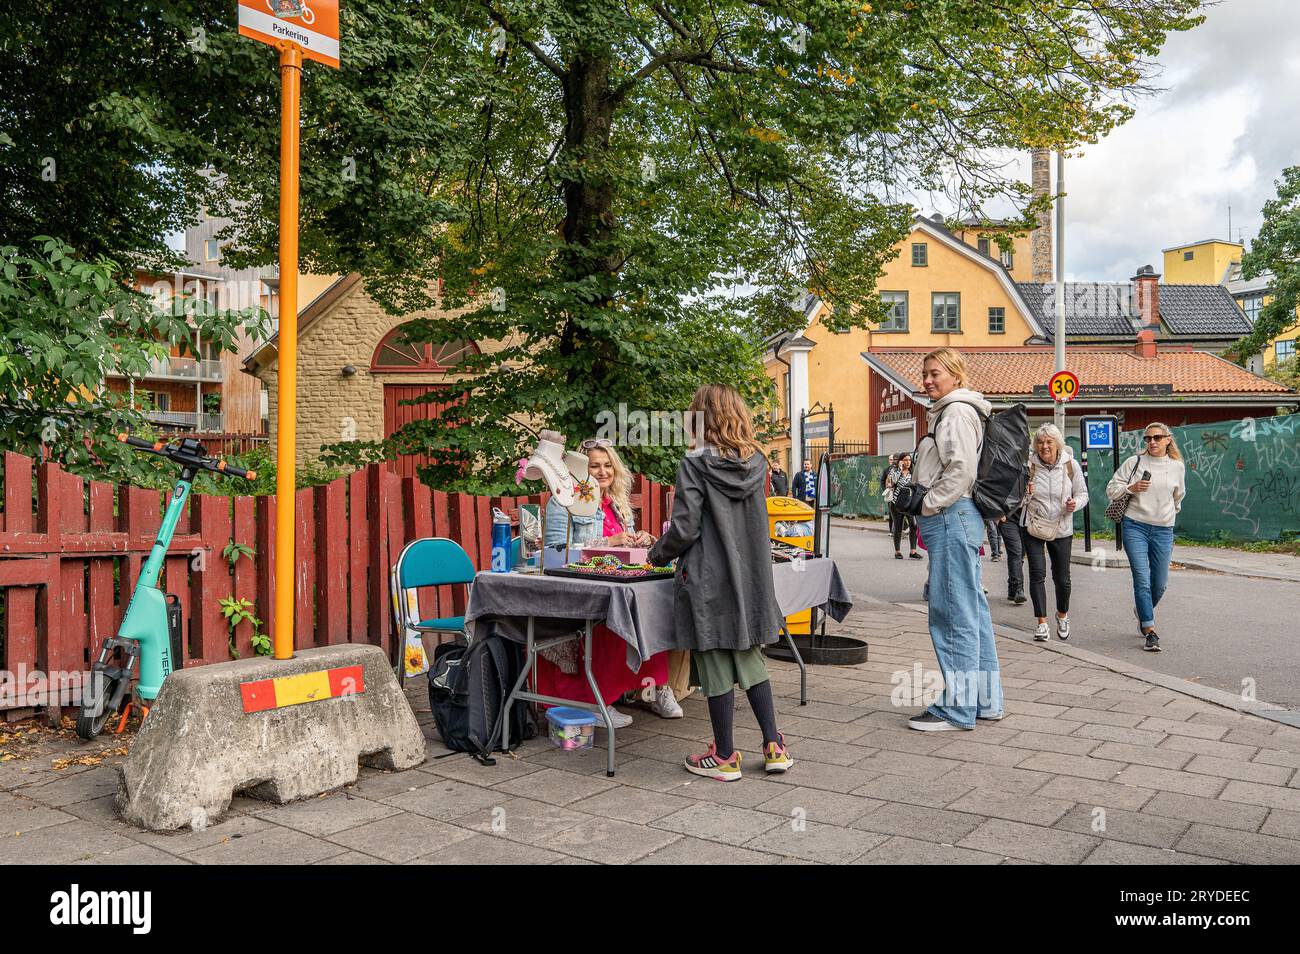 People stroll around town on Culture night, an annual event on the last Saturday in September ,that exhibits diverse aspects of culture in Norrköping Stock Photo